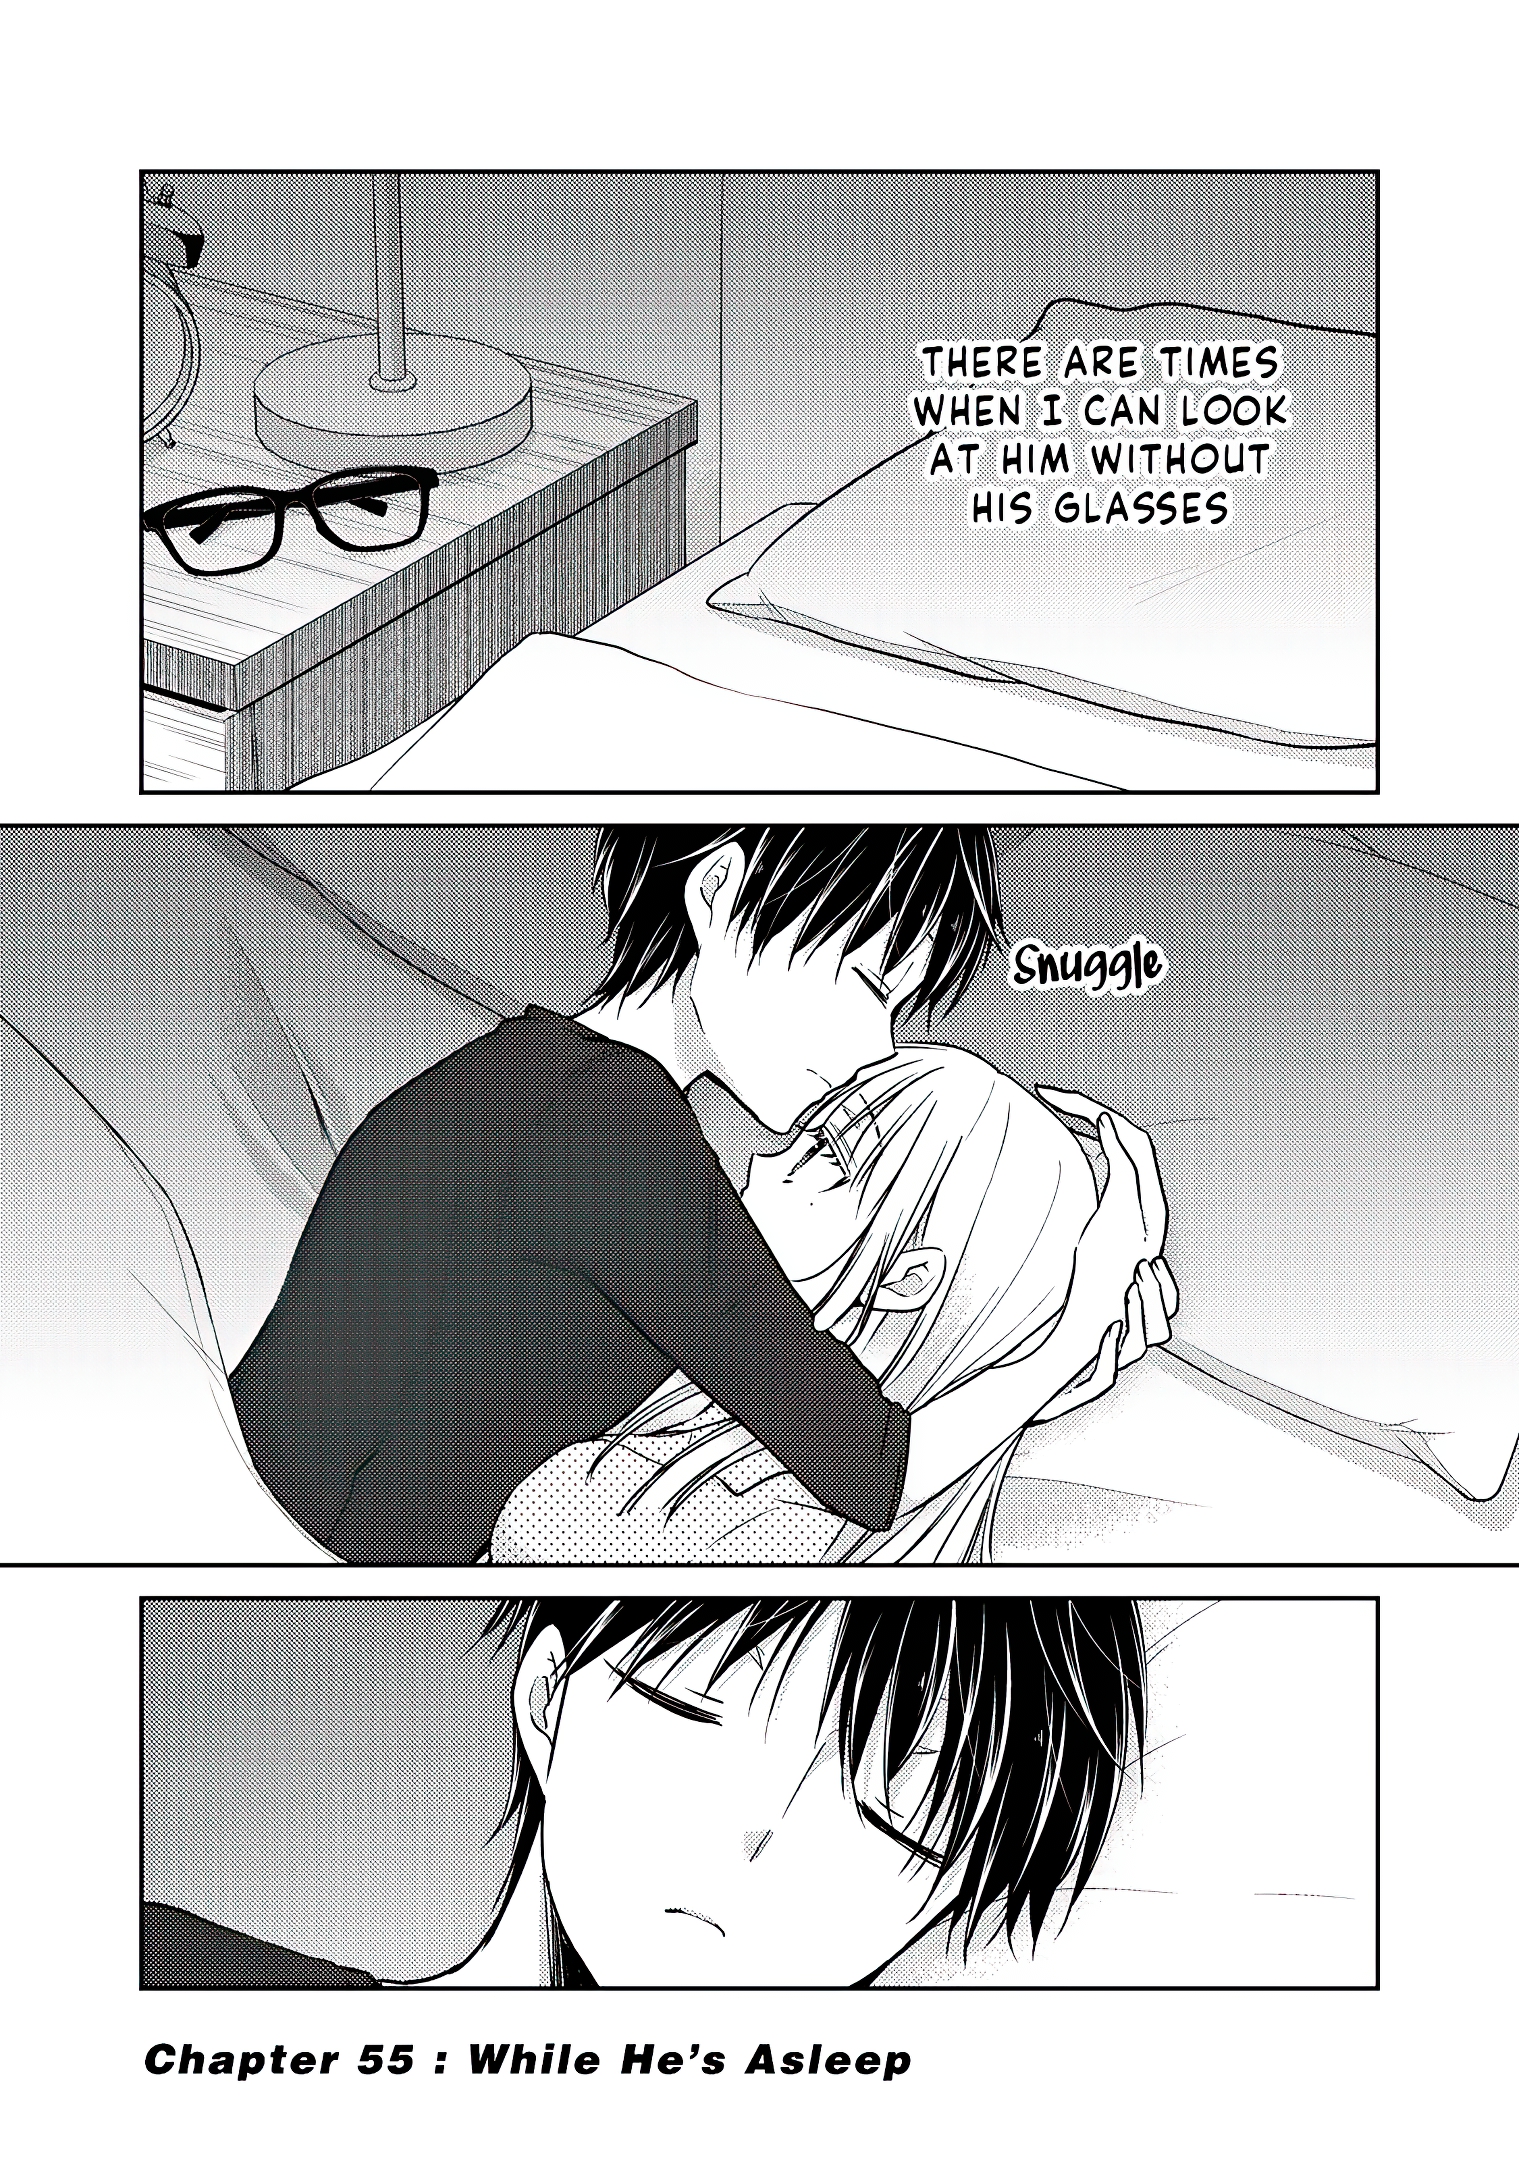 We May Be An Inexperienced Couple But... Vol.7 Chapter 55: While He's Asleep - Picture 3